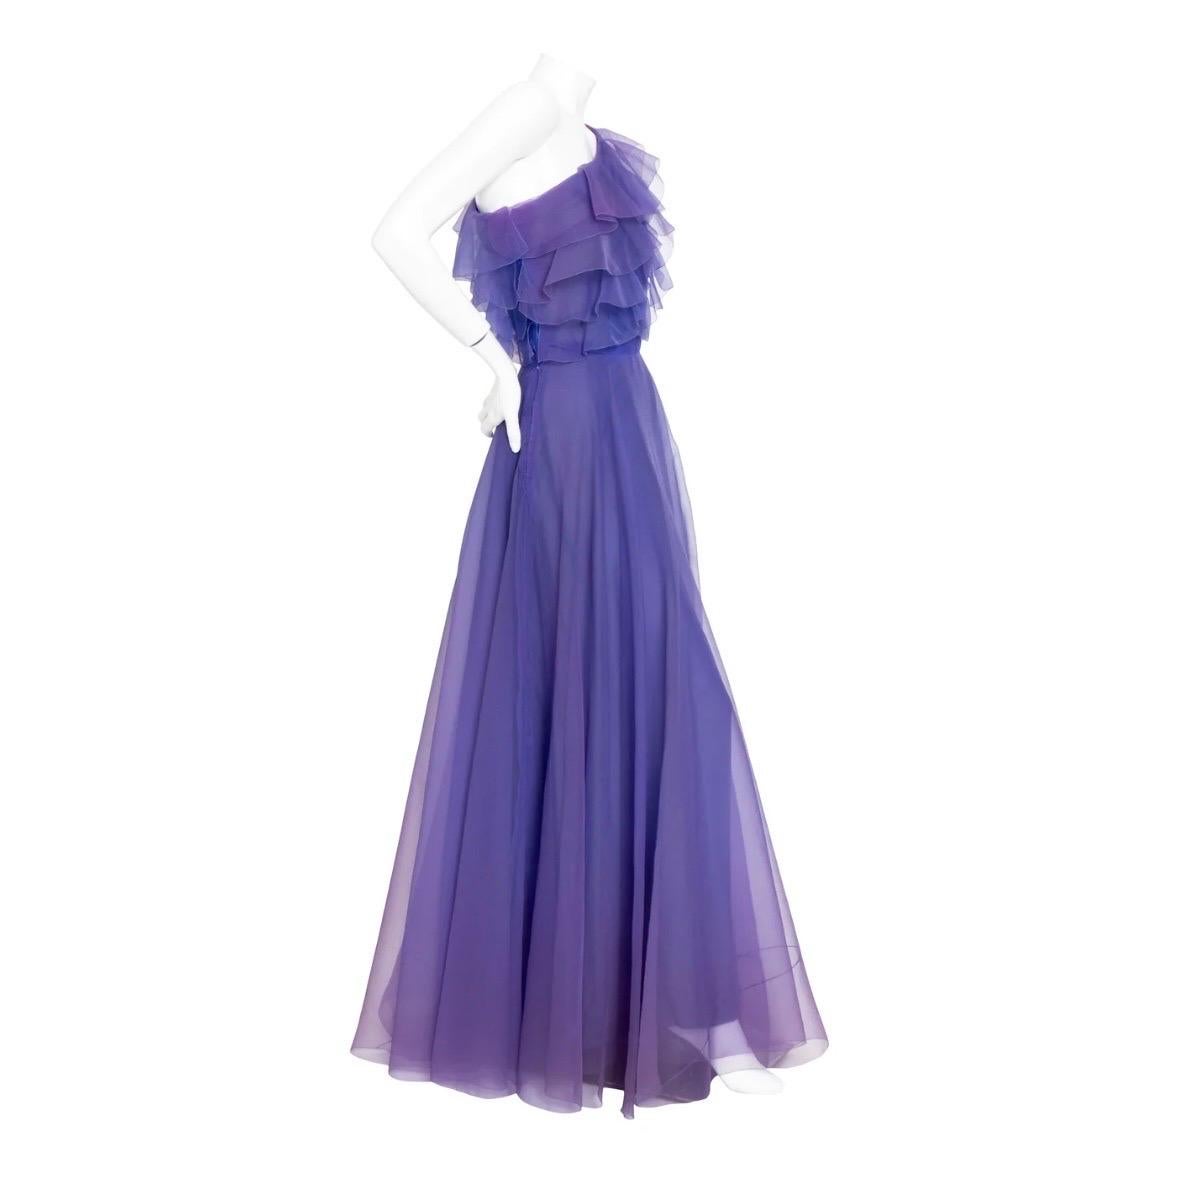 Haute couture silk organza gown by Christian Dior
Autumn/Winter 1972 Collection
Floor length
One Shoulder
Ruffled bodice
Blue lining topped with lightweight purple organza; gives chameleon-like effect
High waist
Material: silk; no content